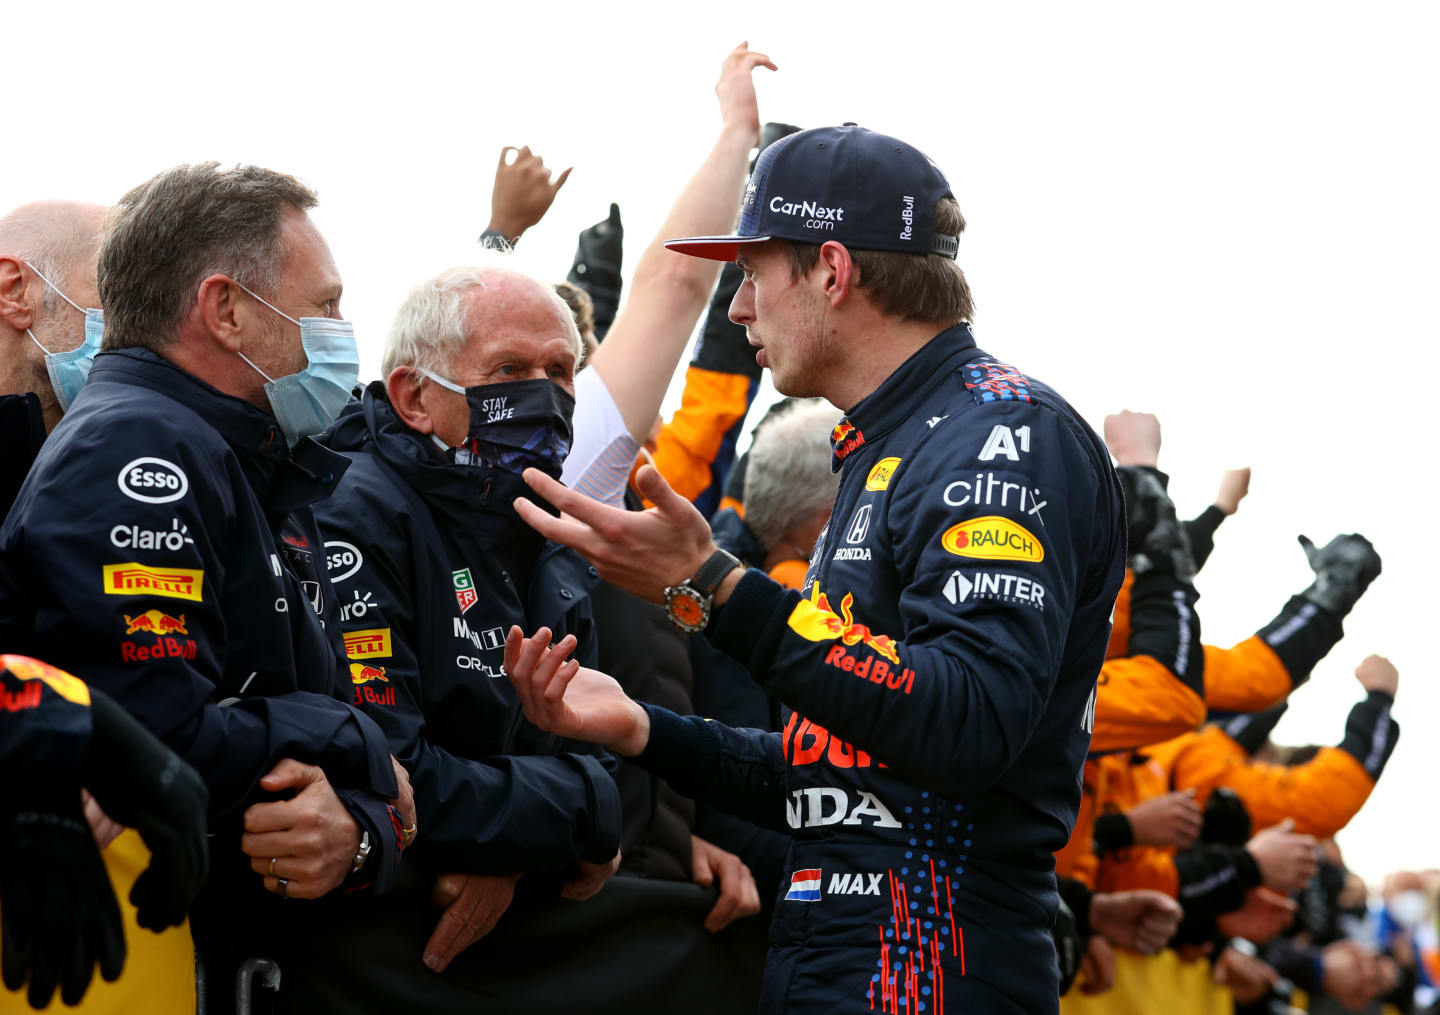 IMOLA, ITALY - APRIL 18: Race winner Max Verstappen of Netherlands and Red Bull Racing talks with Red Bull Racing Team Principal Christian Horner and Red Bull Racing Team Consultant Dr Helmut Marko in parc ferme after the F1 Grand Prix of Emilia Romagna at Autodromo Enzo e Dino Ferrari on April 18, 2021 in Imola, Italy. (Photo by Bryn Lennon/Getty Images)